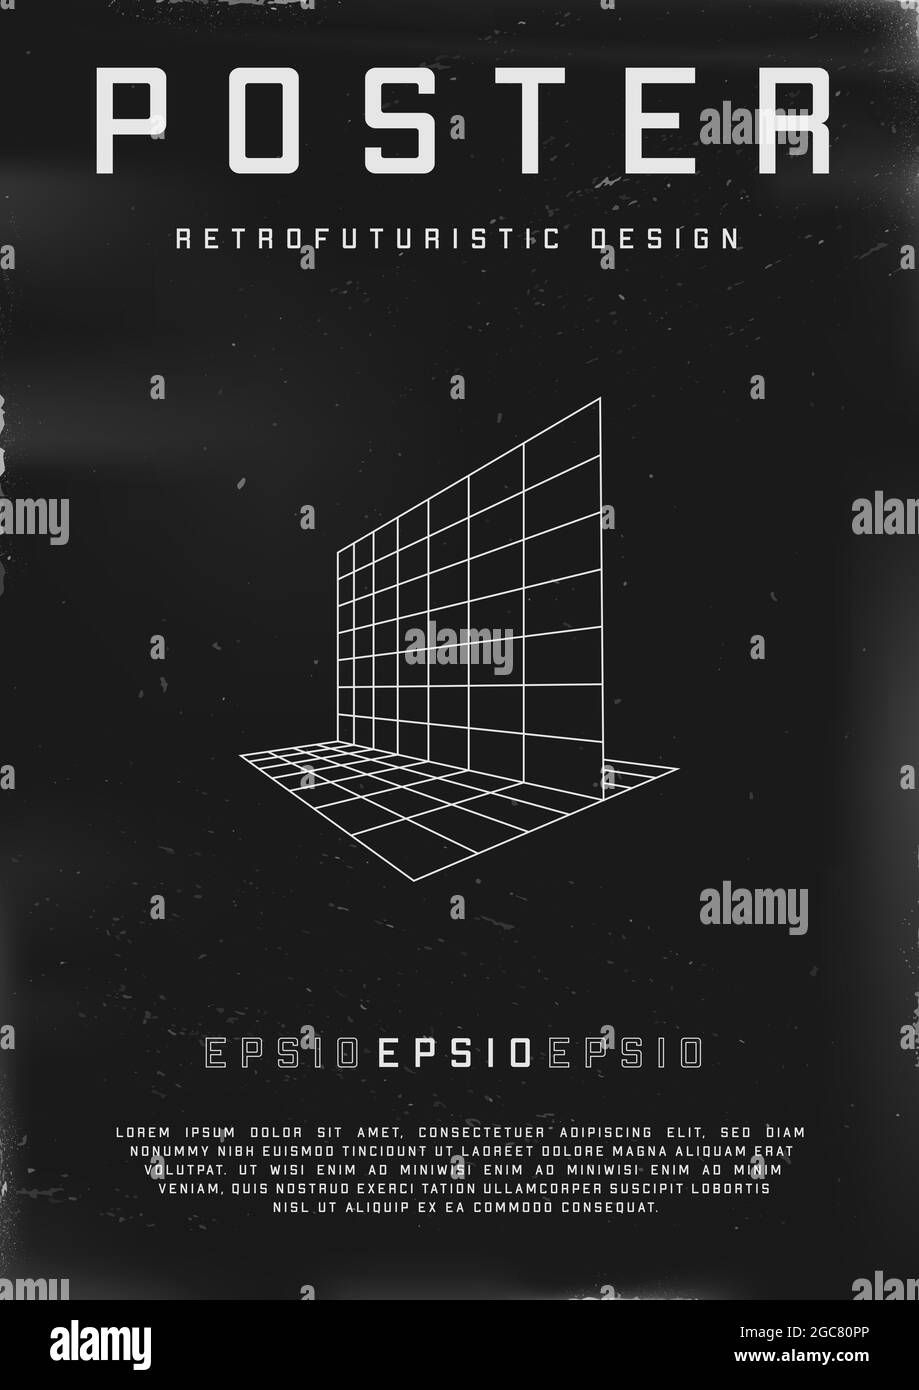 Retrofuturistic poster design with perspective grids. Cyberpunk 80s style poster with perspective flatnesses. Shabby scratched flyer template for your Stock Vector